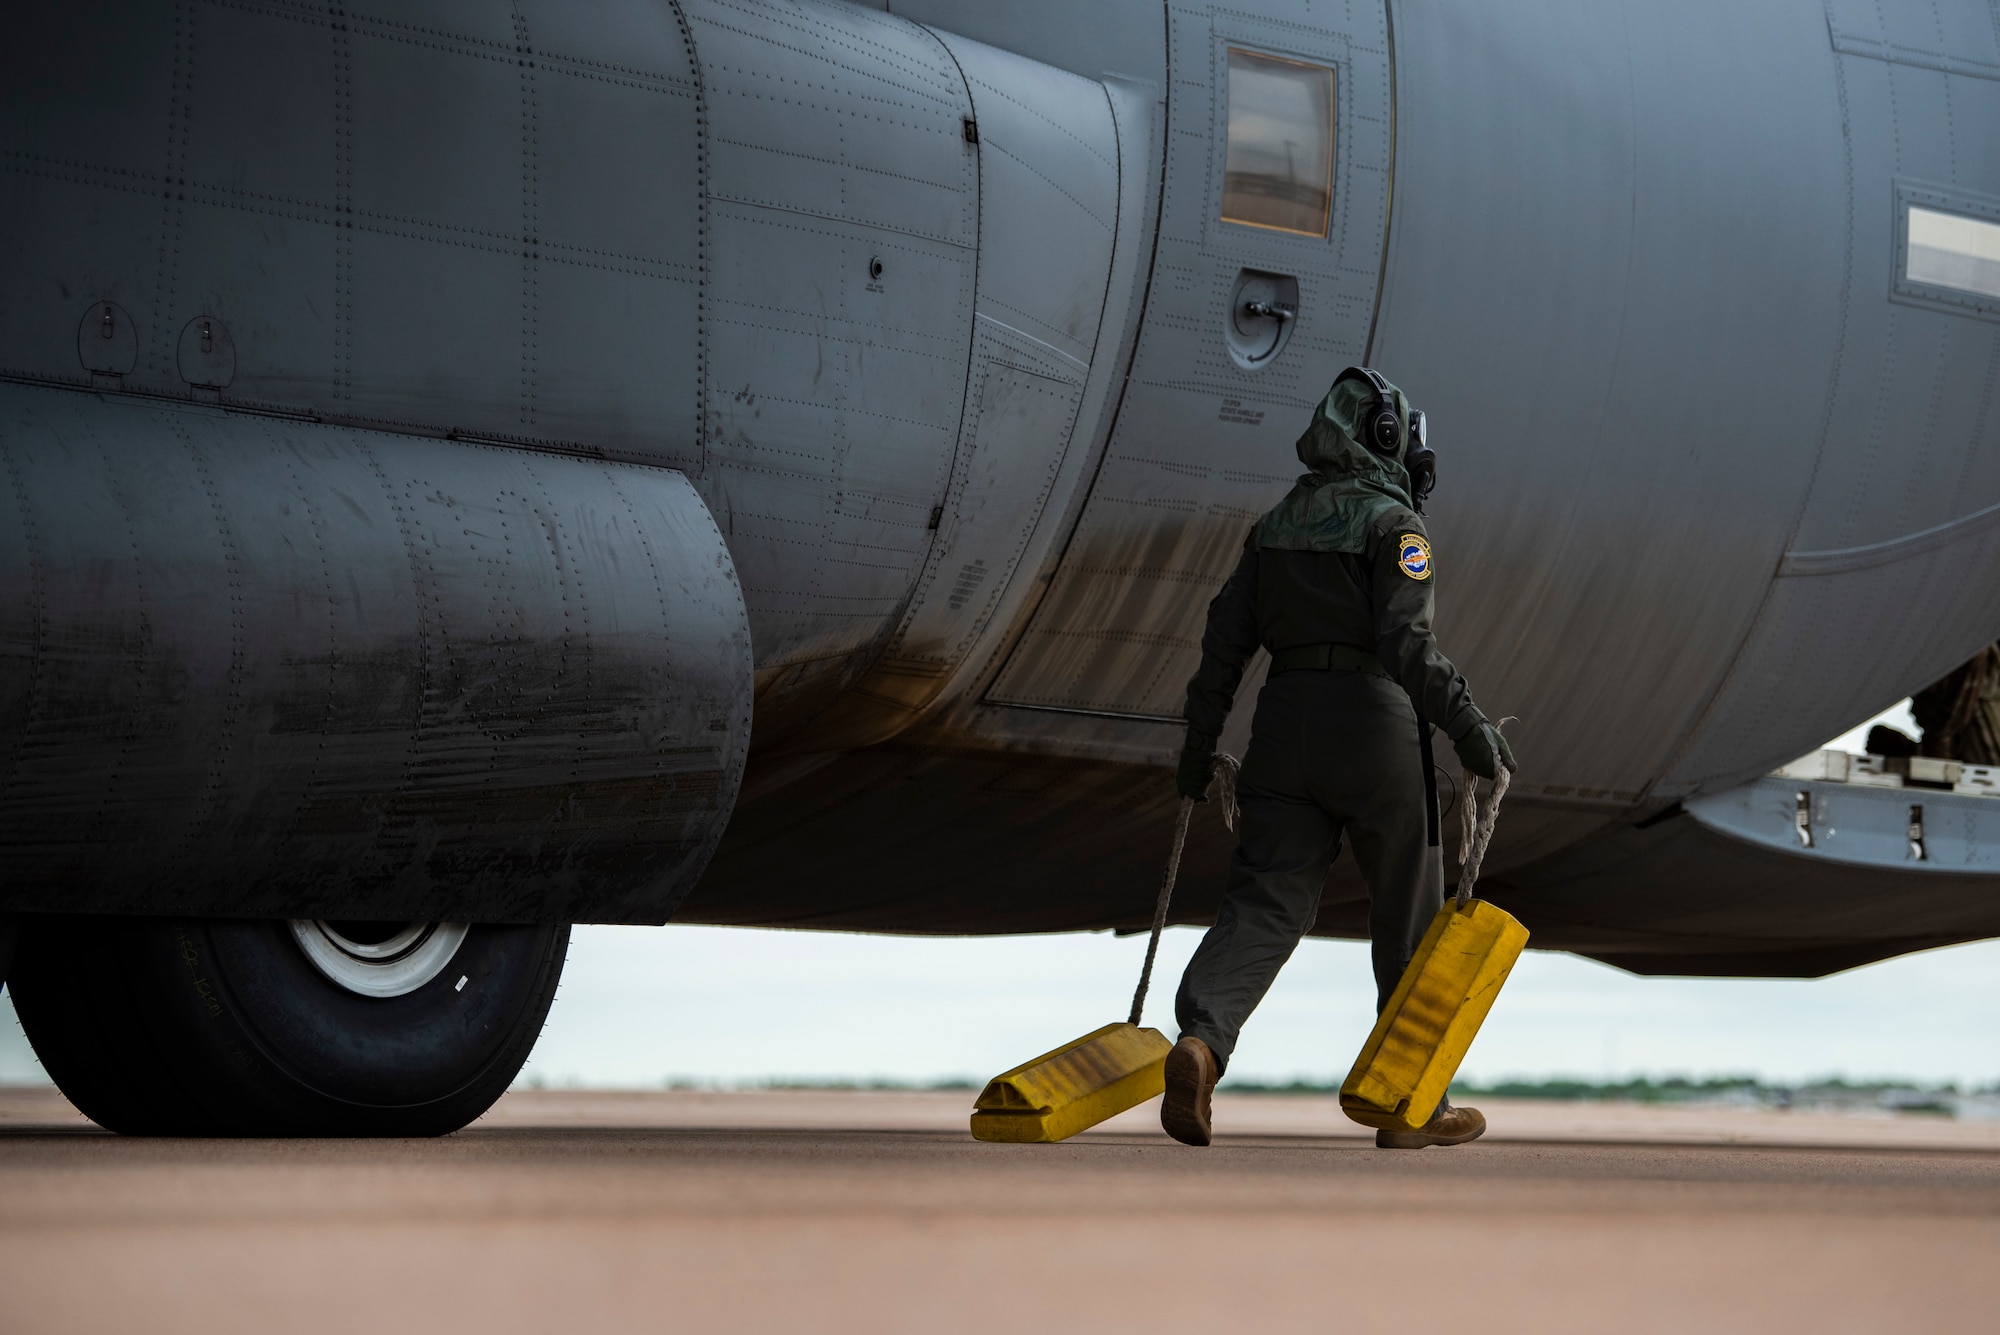 Staff Sgt. Tristan Geray, 40th Airlift Squadron loadmaster, drags tire chocks next to a C-130J Super Hercules at Dyess Air Force Base, Texas, June 3, 2021. C-130J aircrew conducted field testing of the new Two-Piece Undergarment universal integrative ensemble chemical protective suit to assess the equipment's functionality. (U.S. Air Force photo by Airman 1st Class Colin Hollowell)